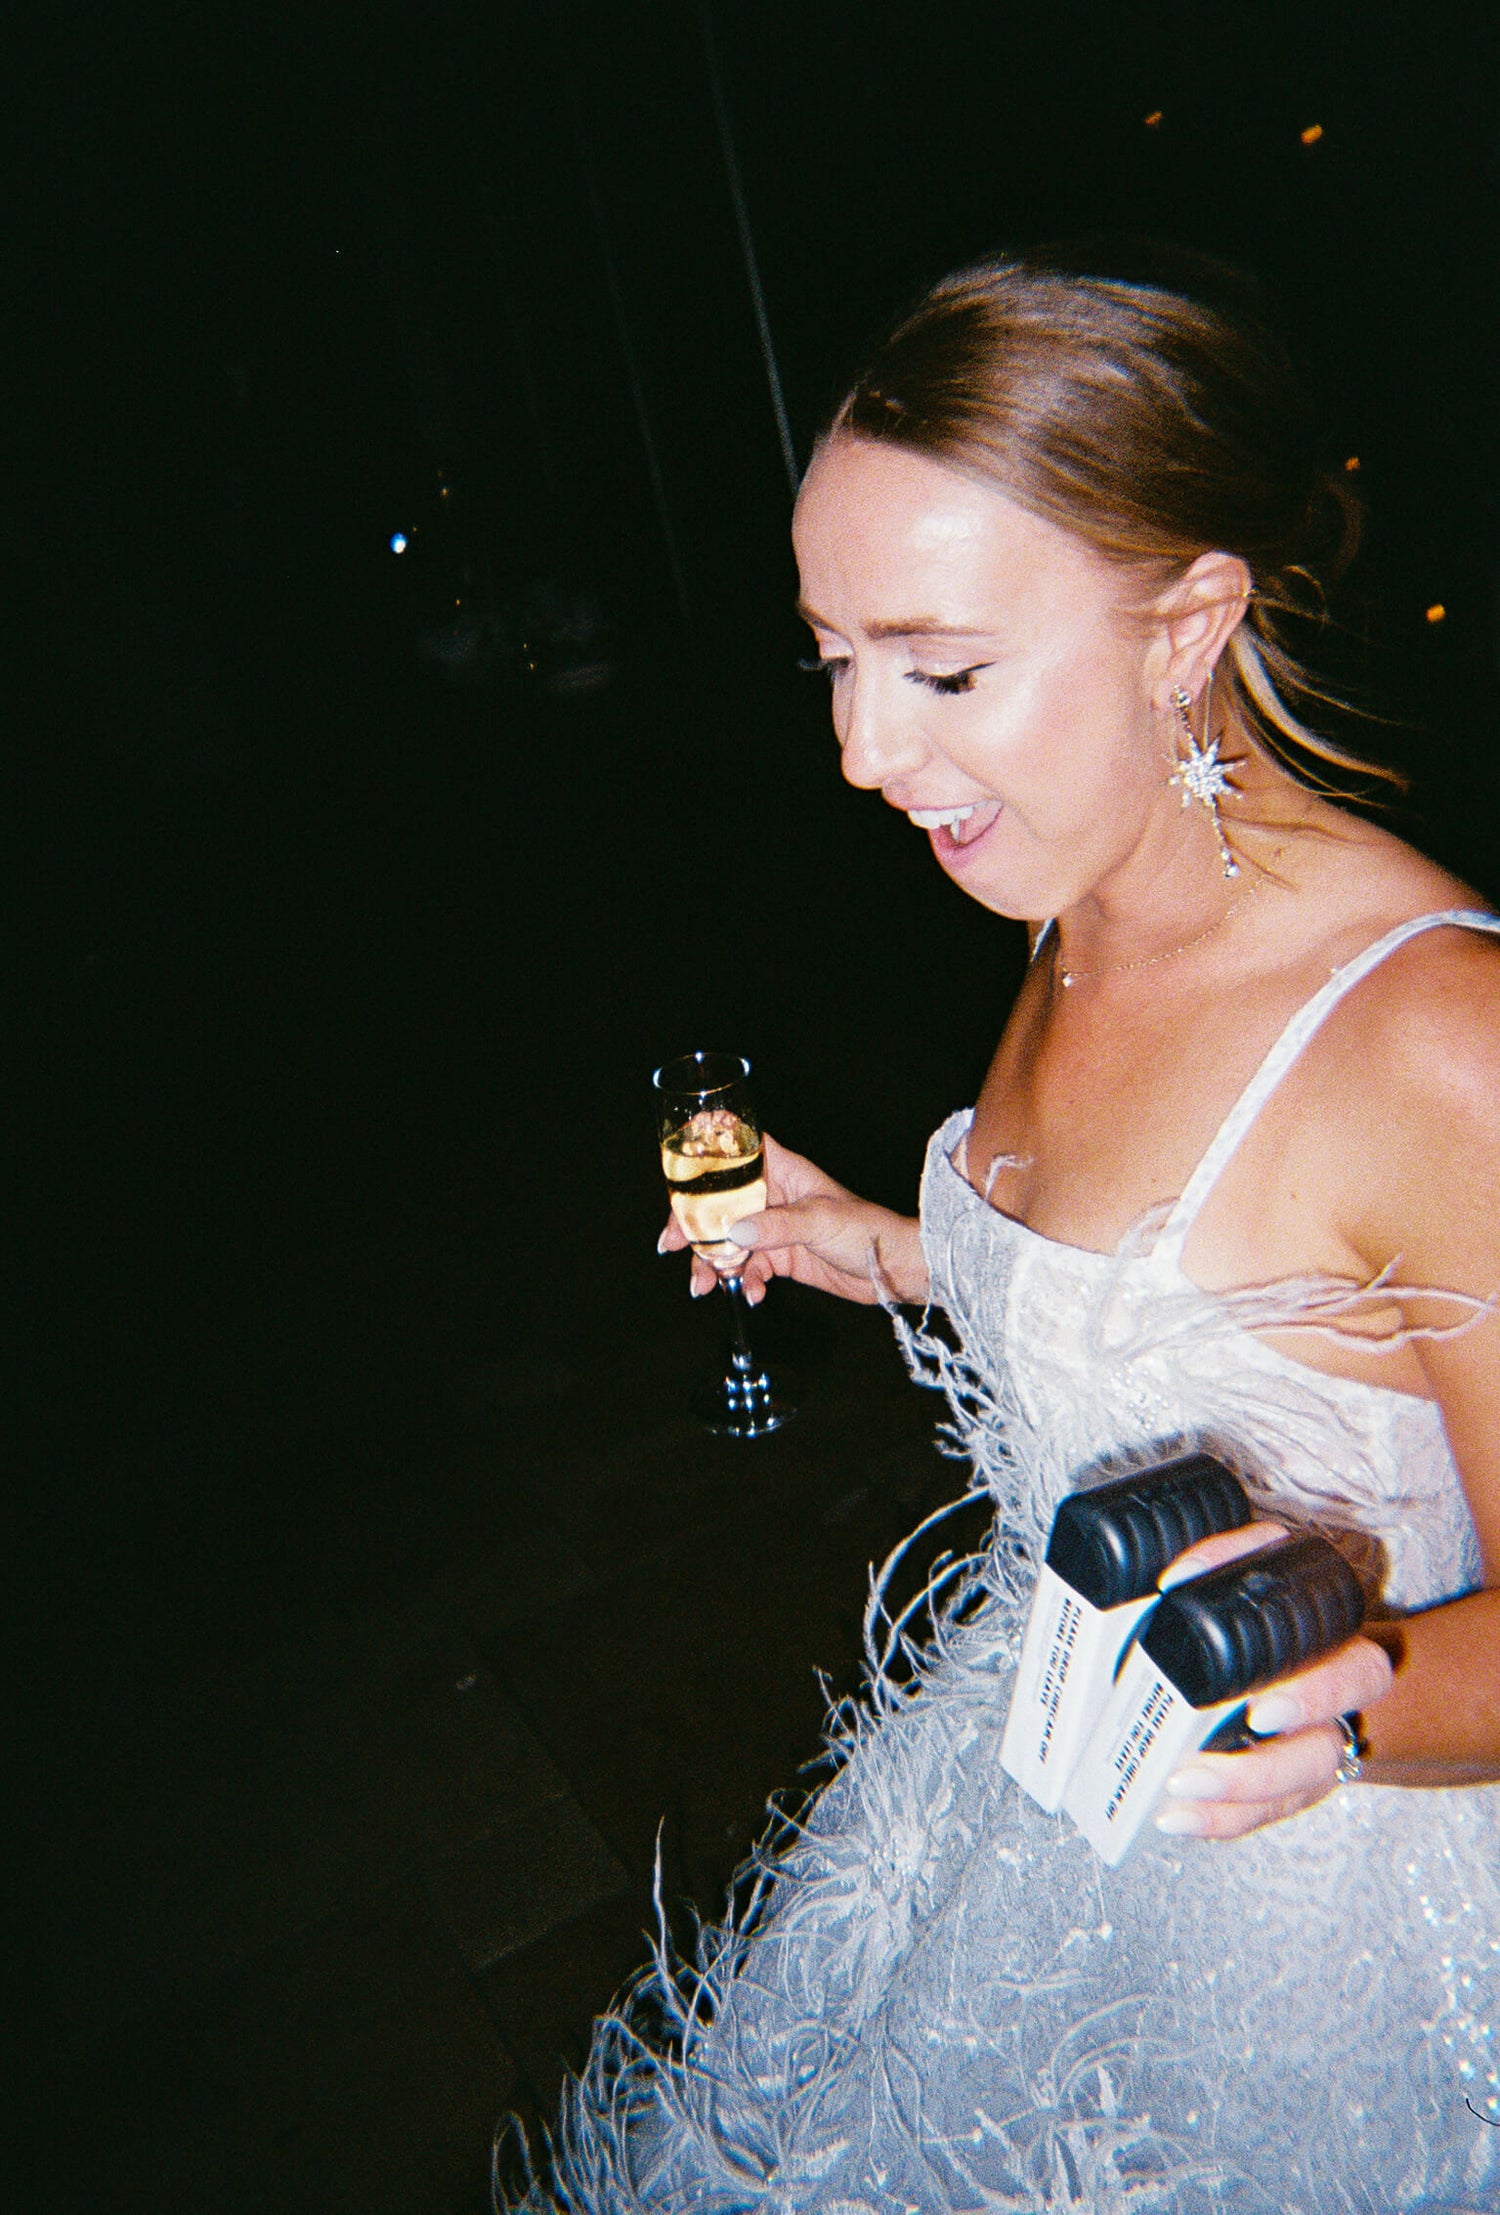 The Three Most Important Tips When Using a Disposable Camera at Your Wedding